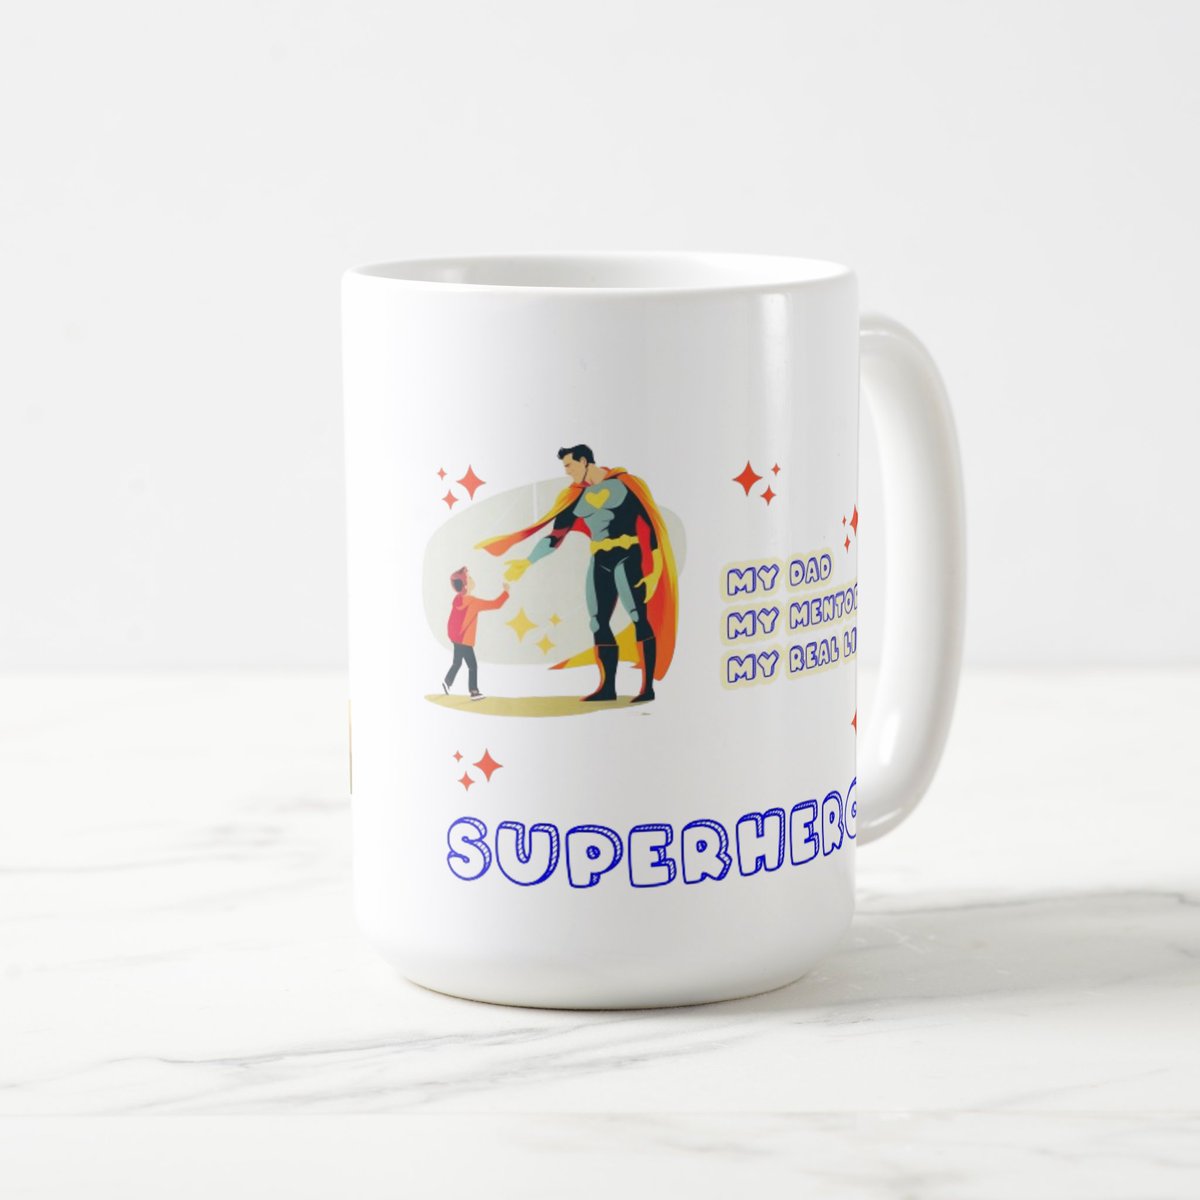 Give Dad the gift of everyday heroics with our 'Superhero Dad' coffee mug – because every sip fuels his superpowers!
#SuperheroDad, #CoffeeMugForDad, #GiftForDad #FathersDayGift, #Fatherhood, #DadLife
#CoffeeLover, #MorningRitual, #DadGiftIdea,
#CoffeeTime
zazzle.com/z/a54ytarh